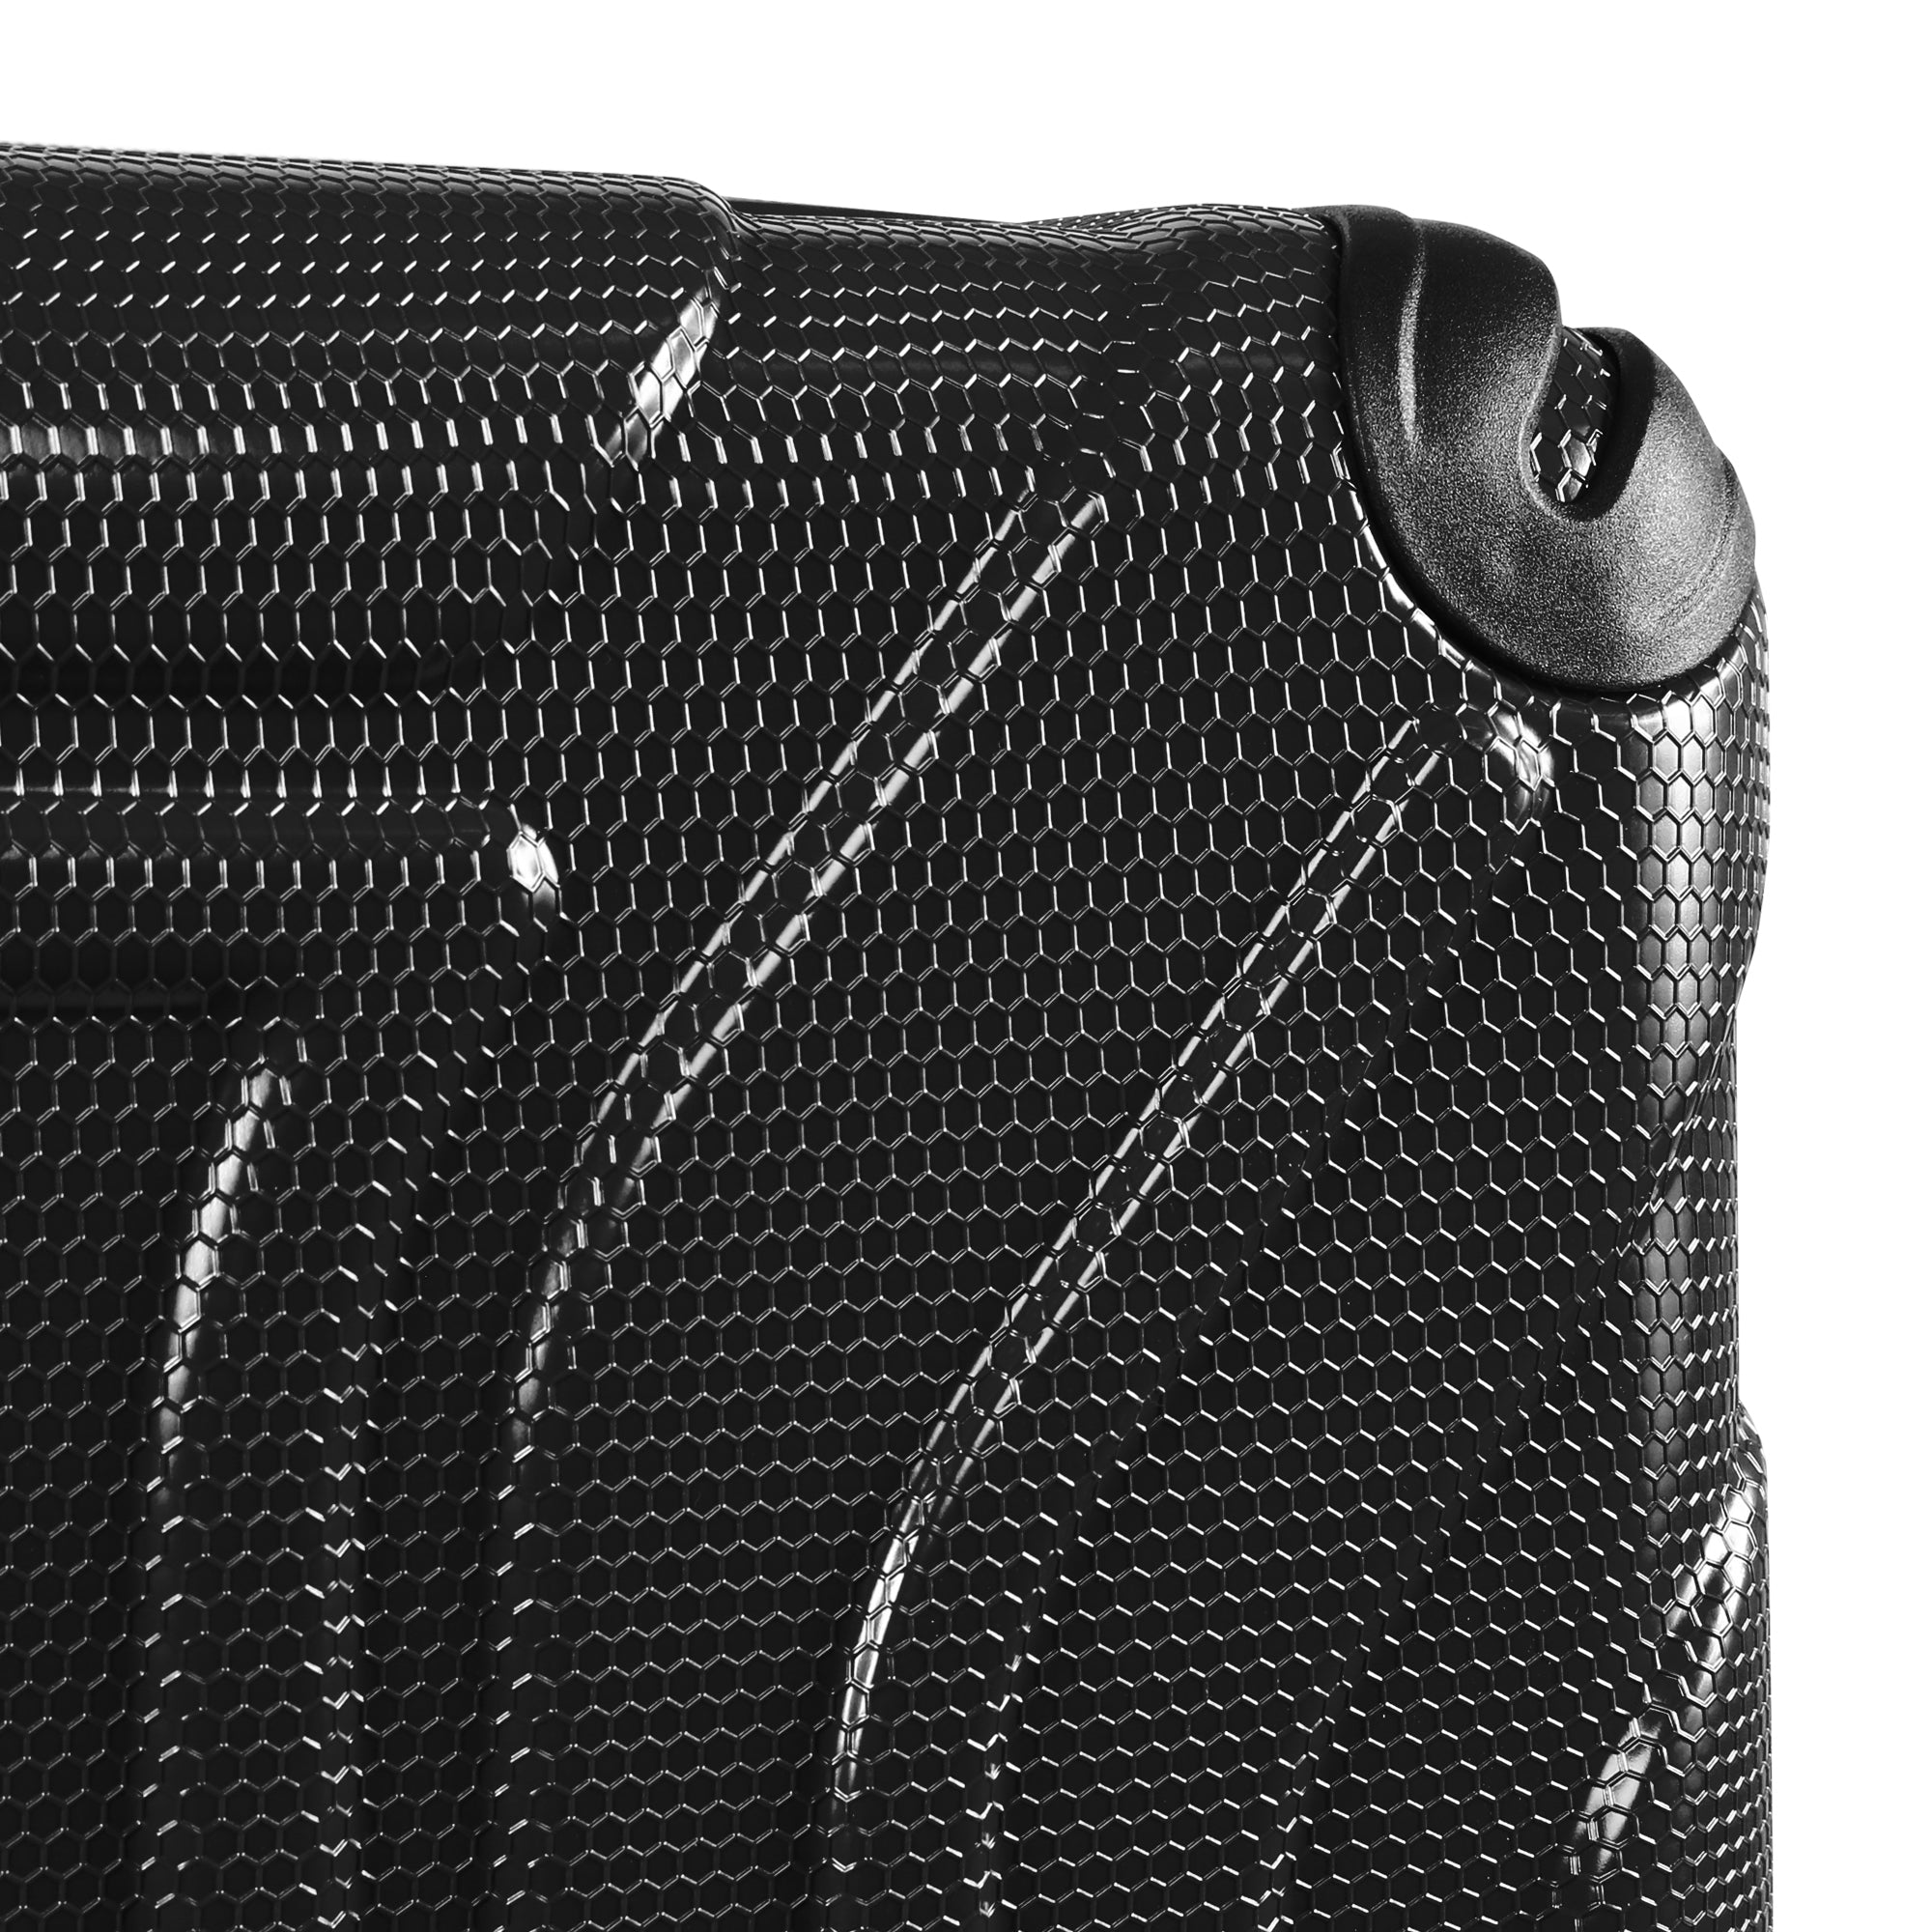 Armor Luggage 21" Carry-on Luggage